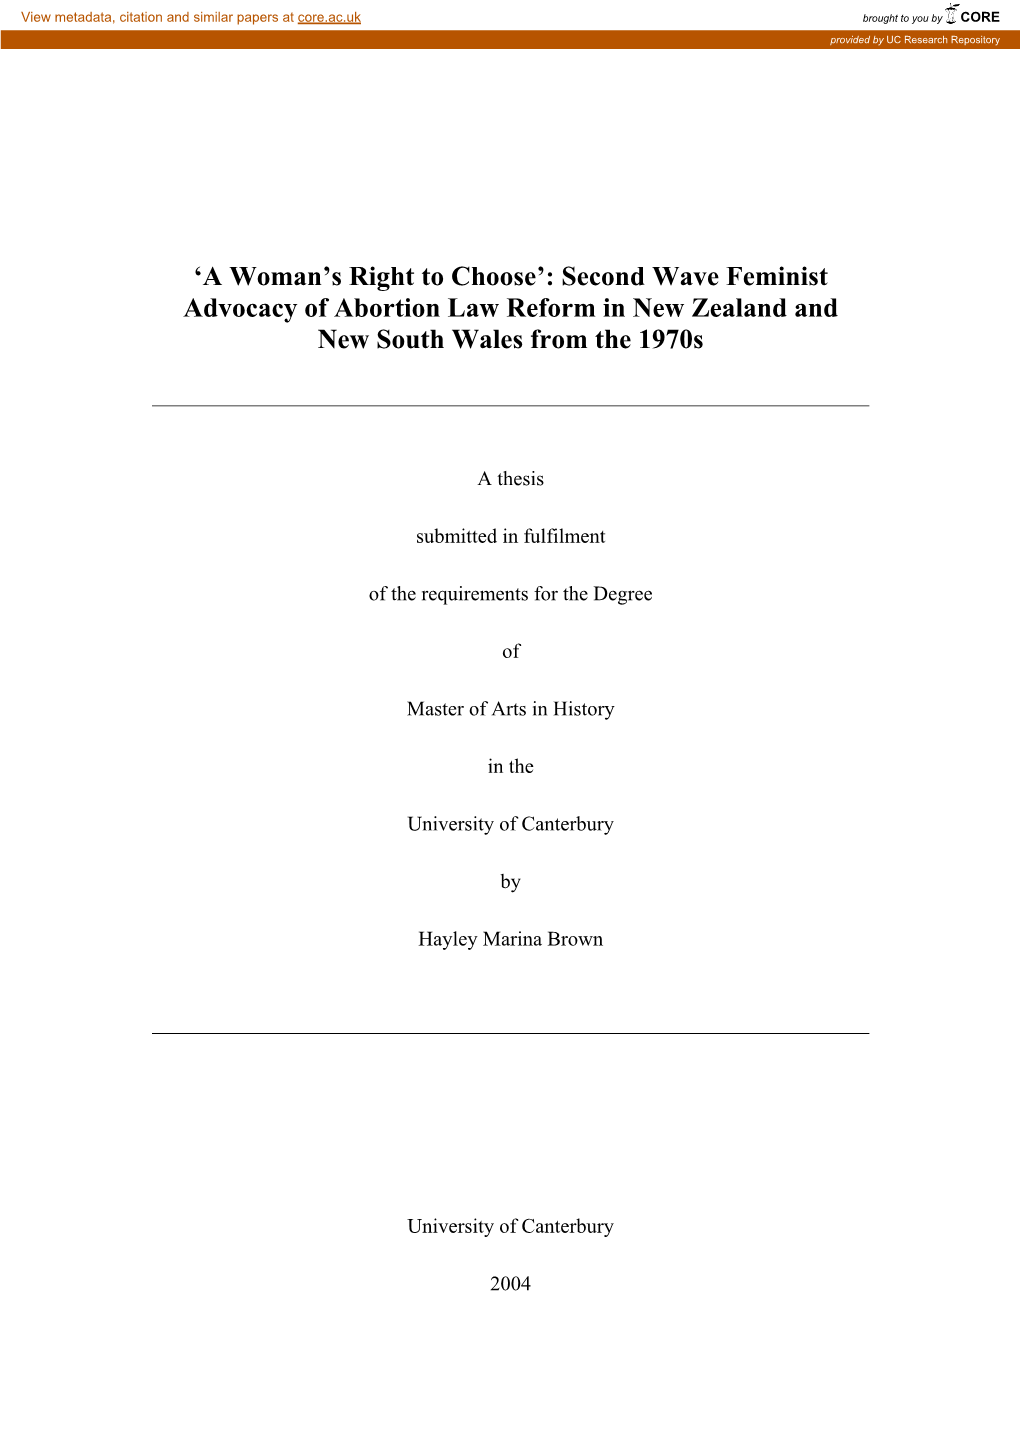 Second Wave Feminist Advocacy of Abortion Law Reform in New Zealand and New South Wales from the 1970S